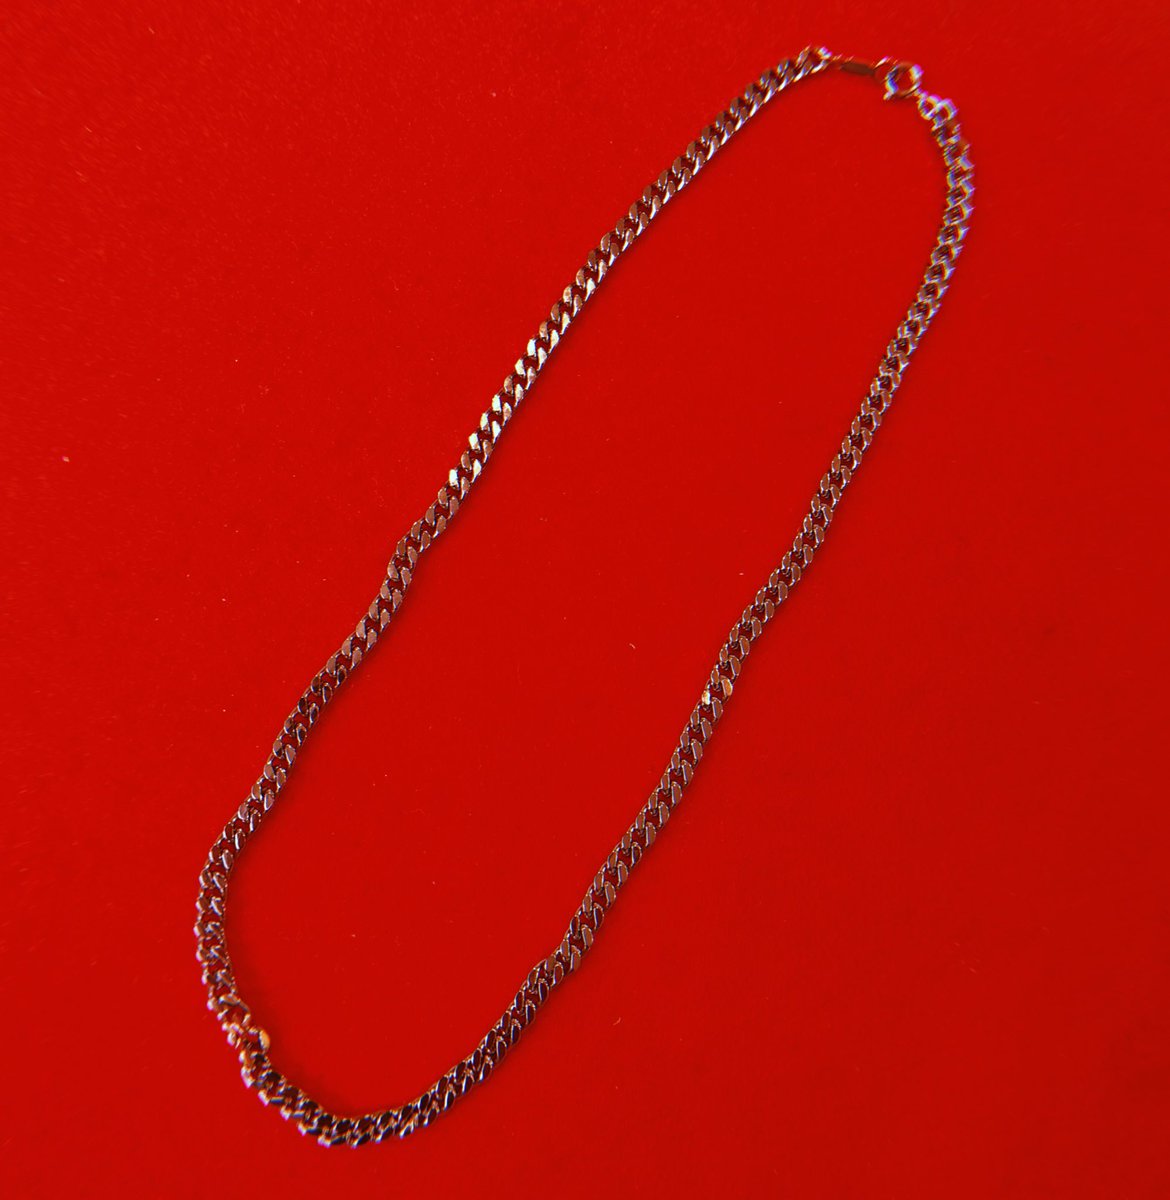 A D G Est 12 New Arrival Plain Silver Chain Necklace Aileron Dg T Co Wovgdqngdp シルバーアクセ チェーンネックレス チョーカー サブスト女子 ストリート女子 韓国ファッション